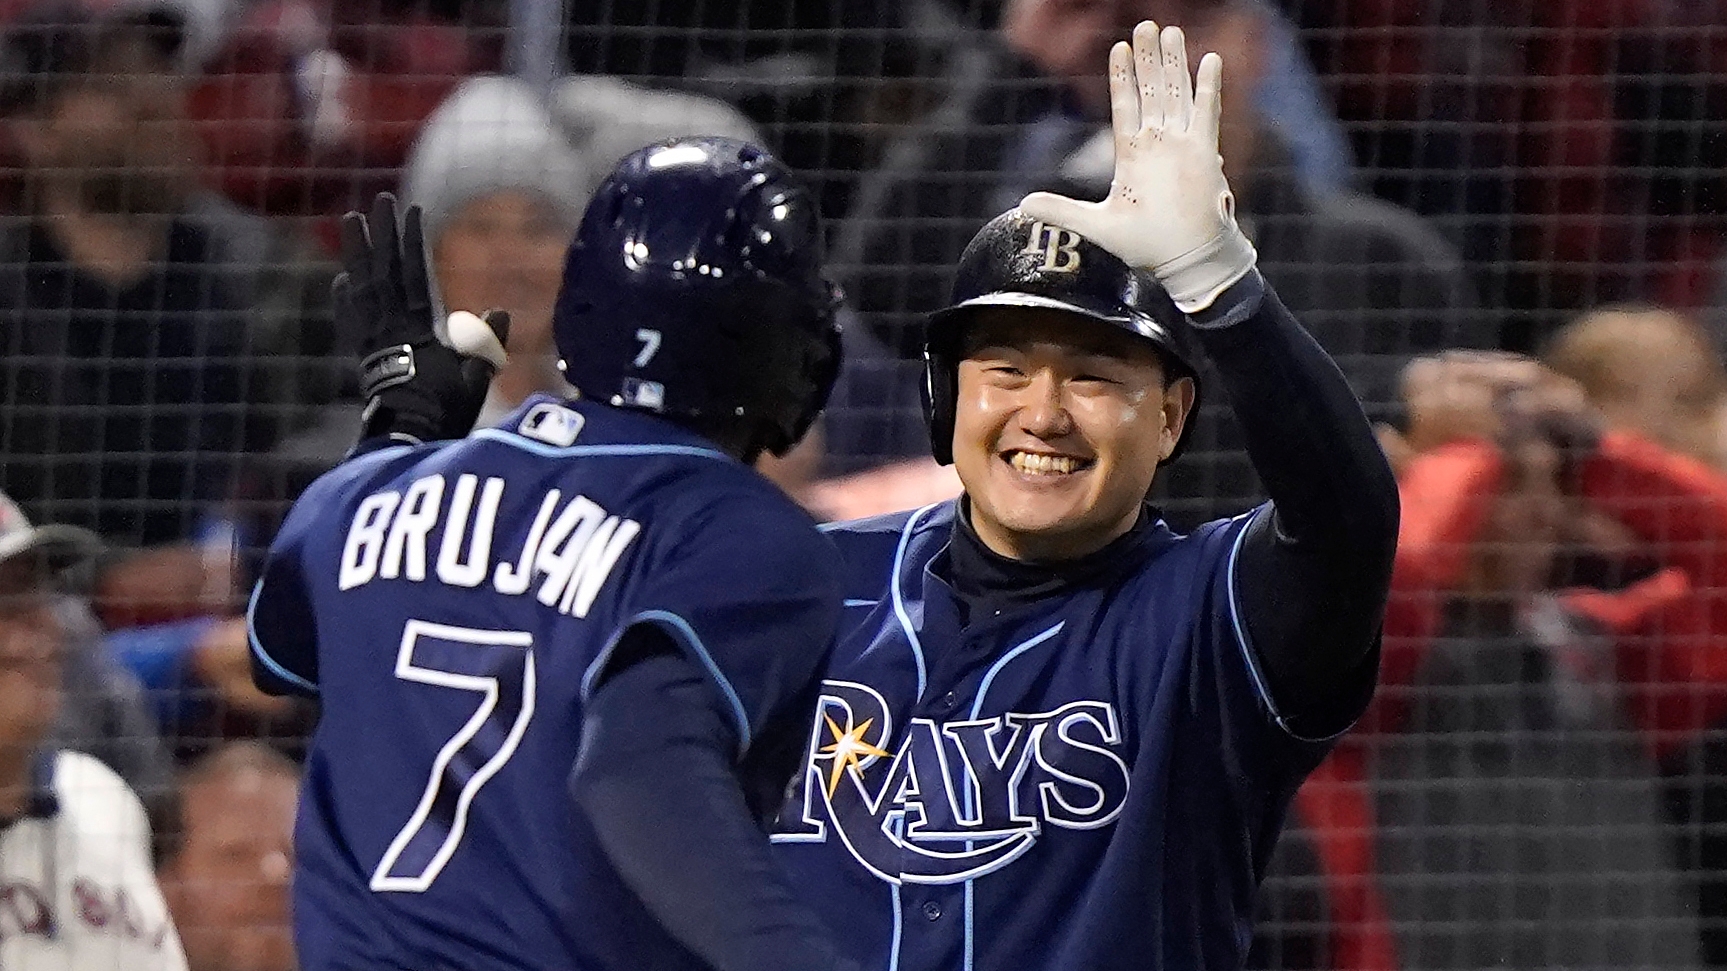 The best 10 game hitting stretch in Tampa Bay Rays history belongs